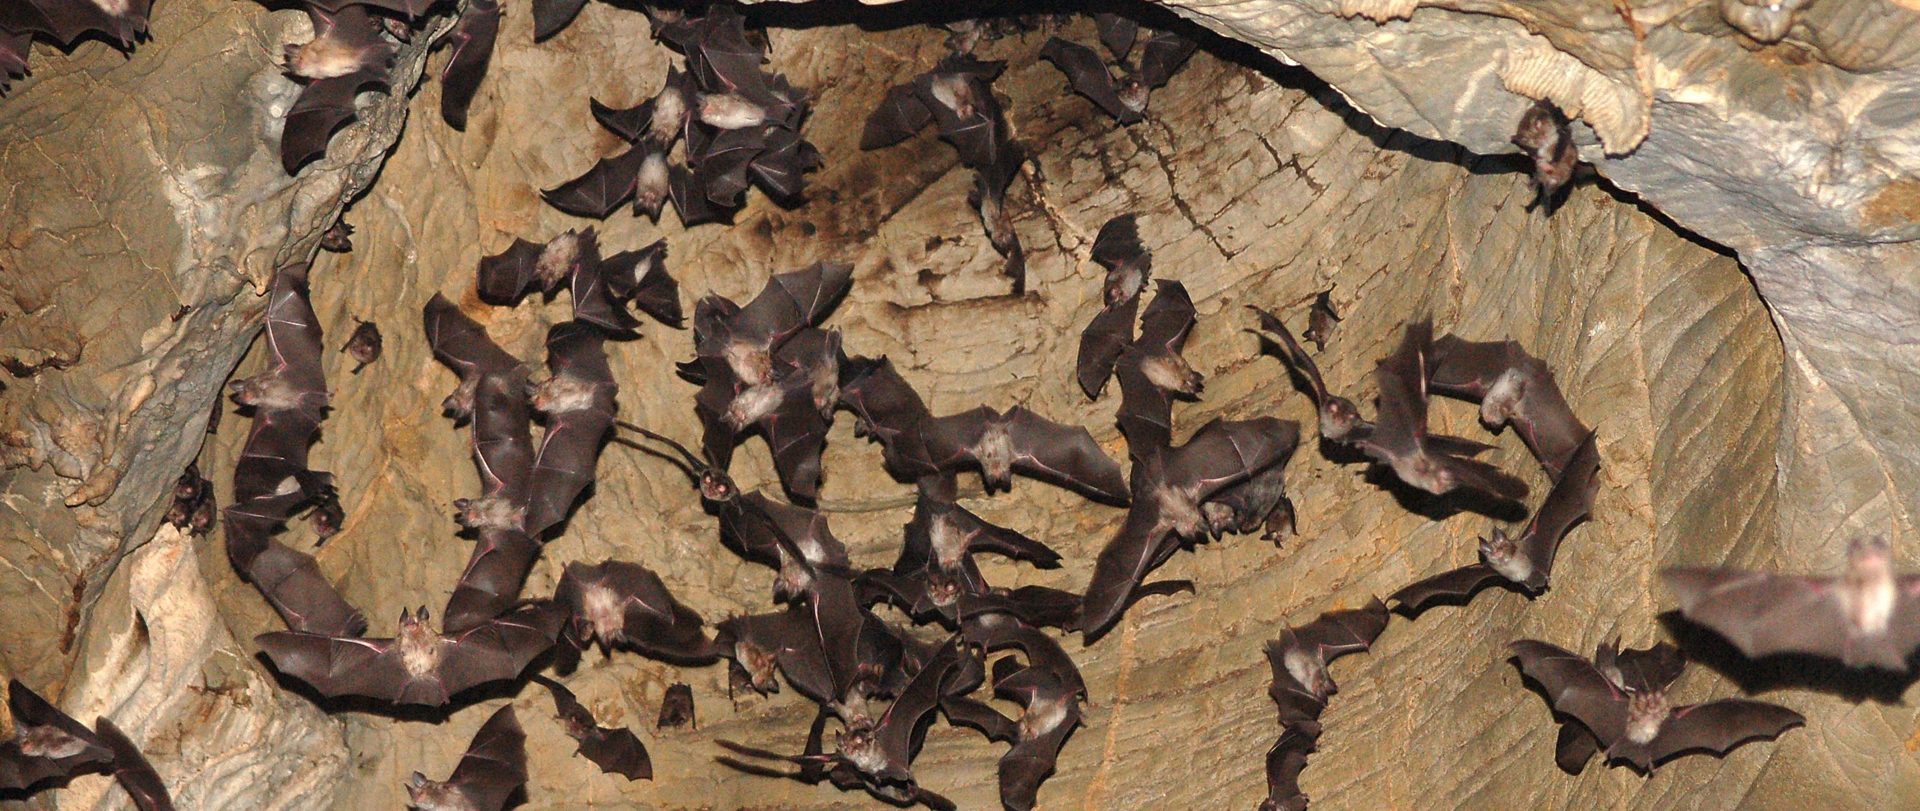 SEE THE LARGEST<br>MATERNITY COLONY OF BATS IN SLOVENIA!